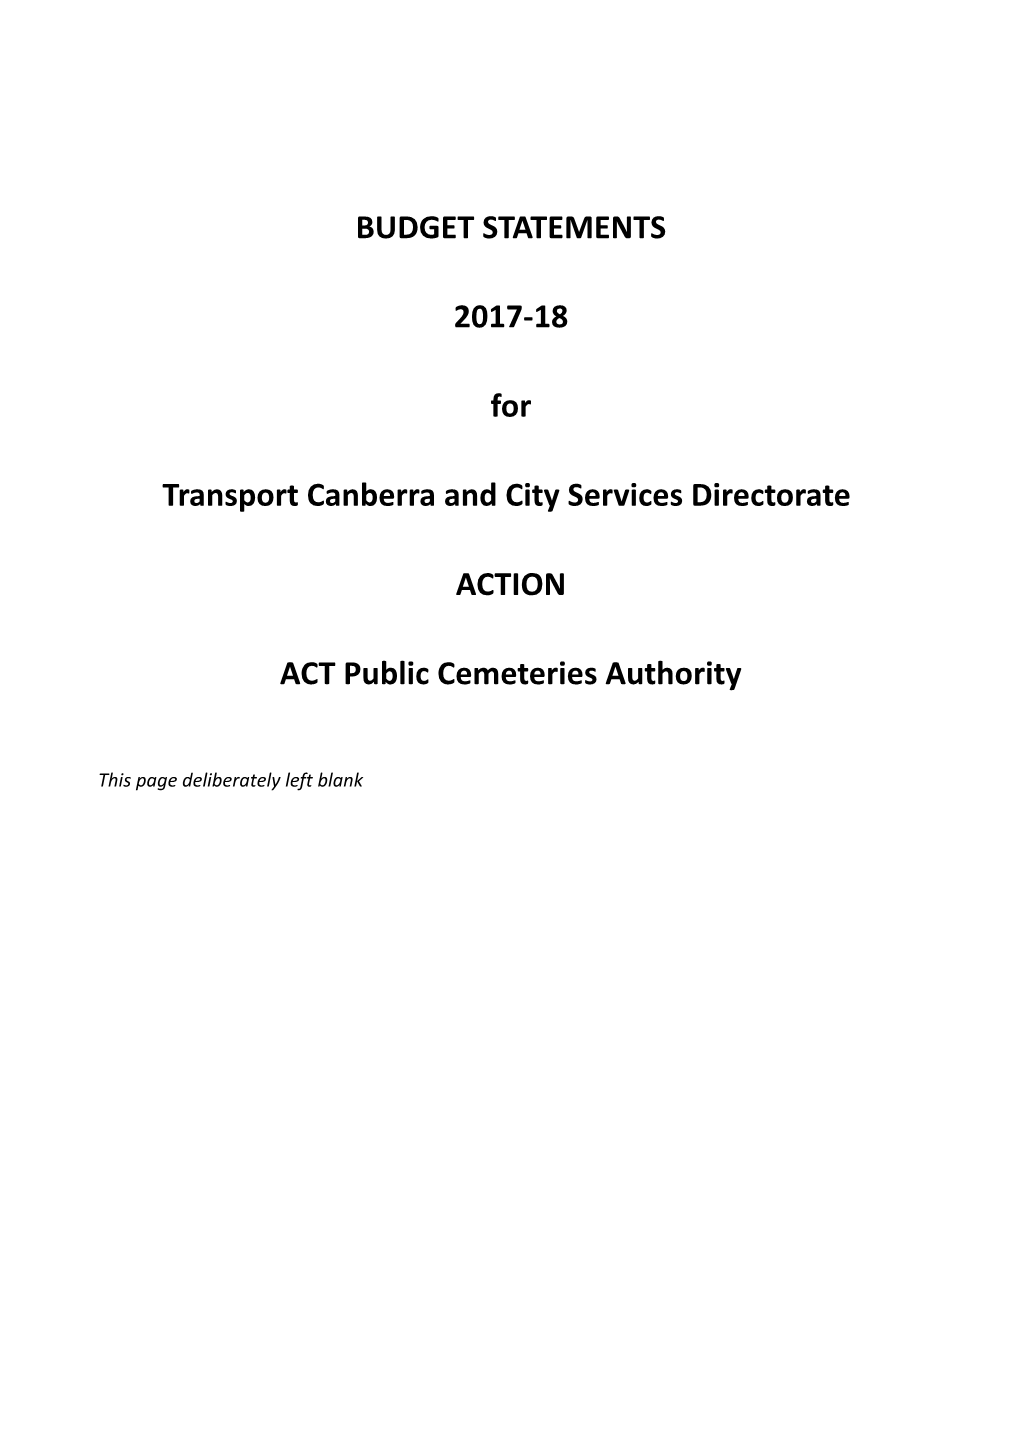 Transport Canberra and City Services Directorate